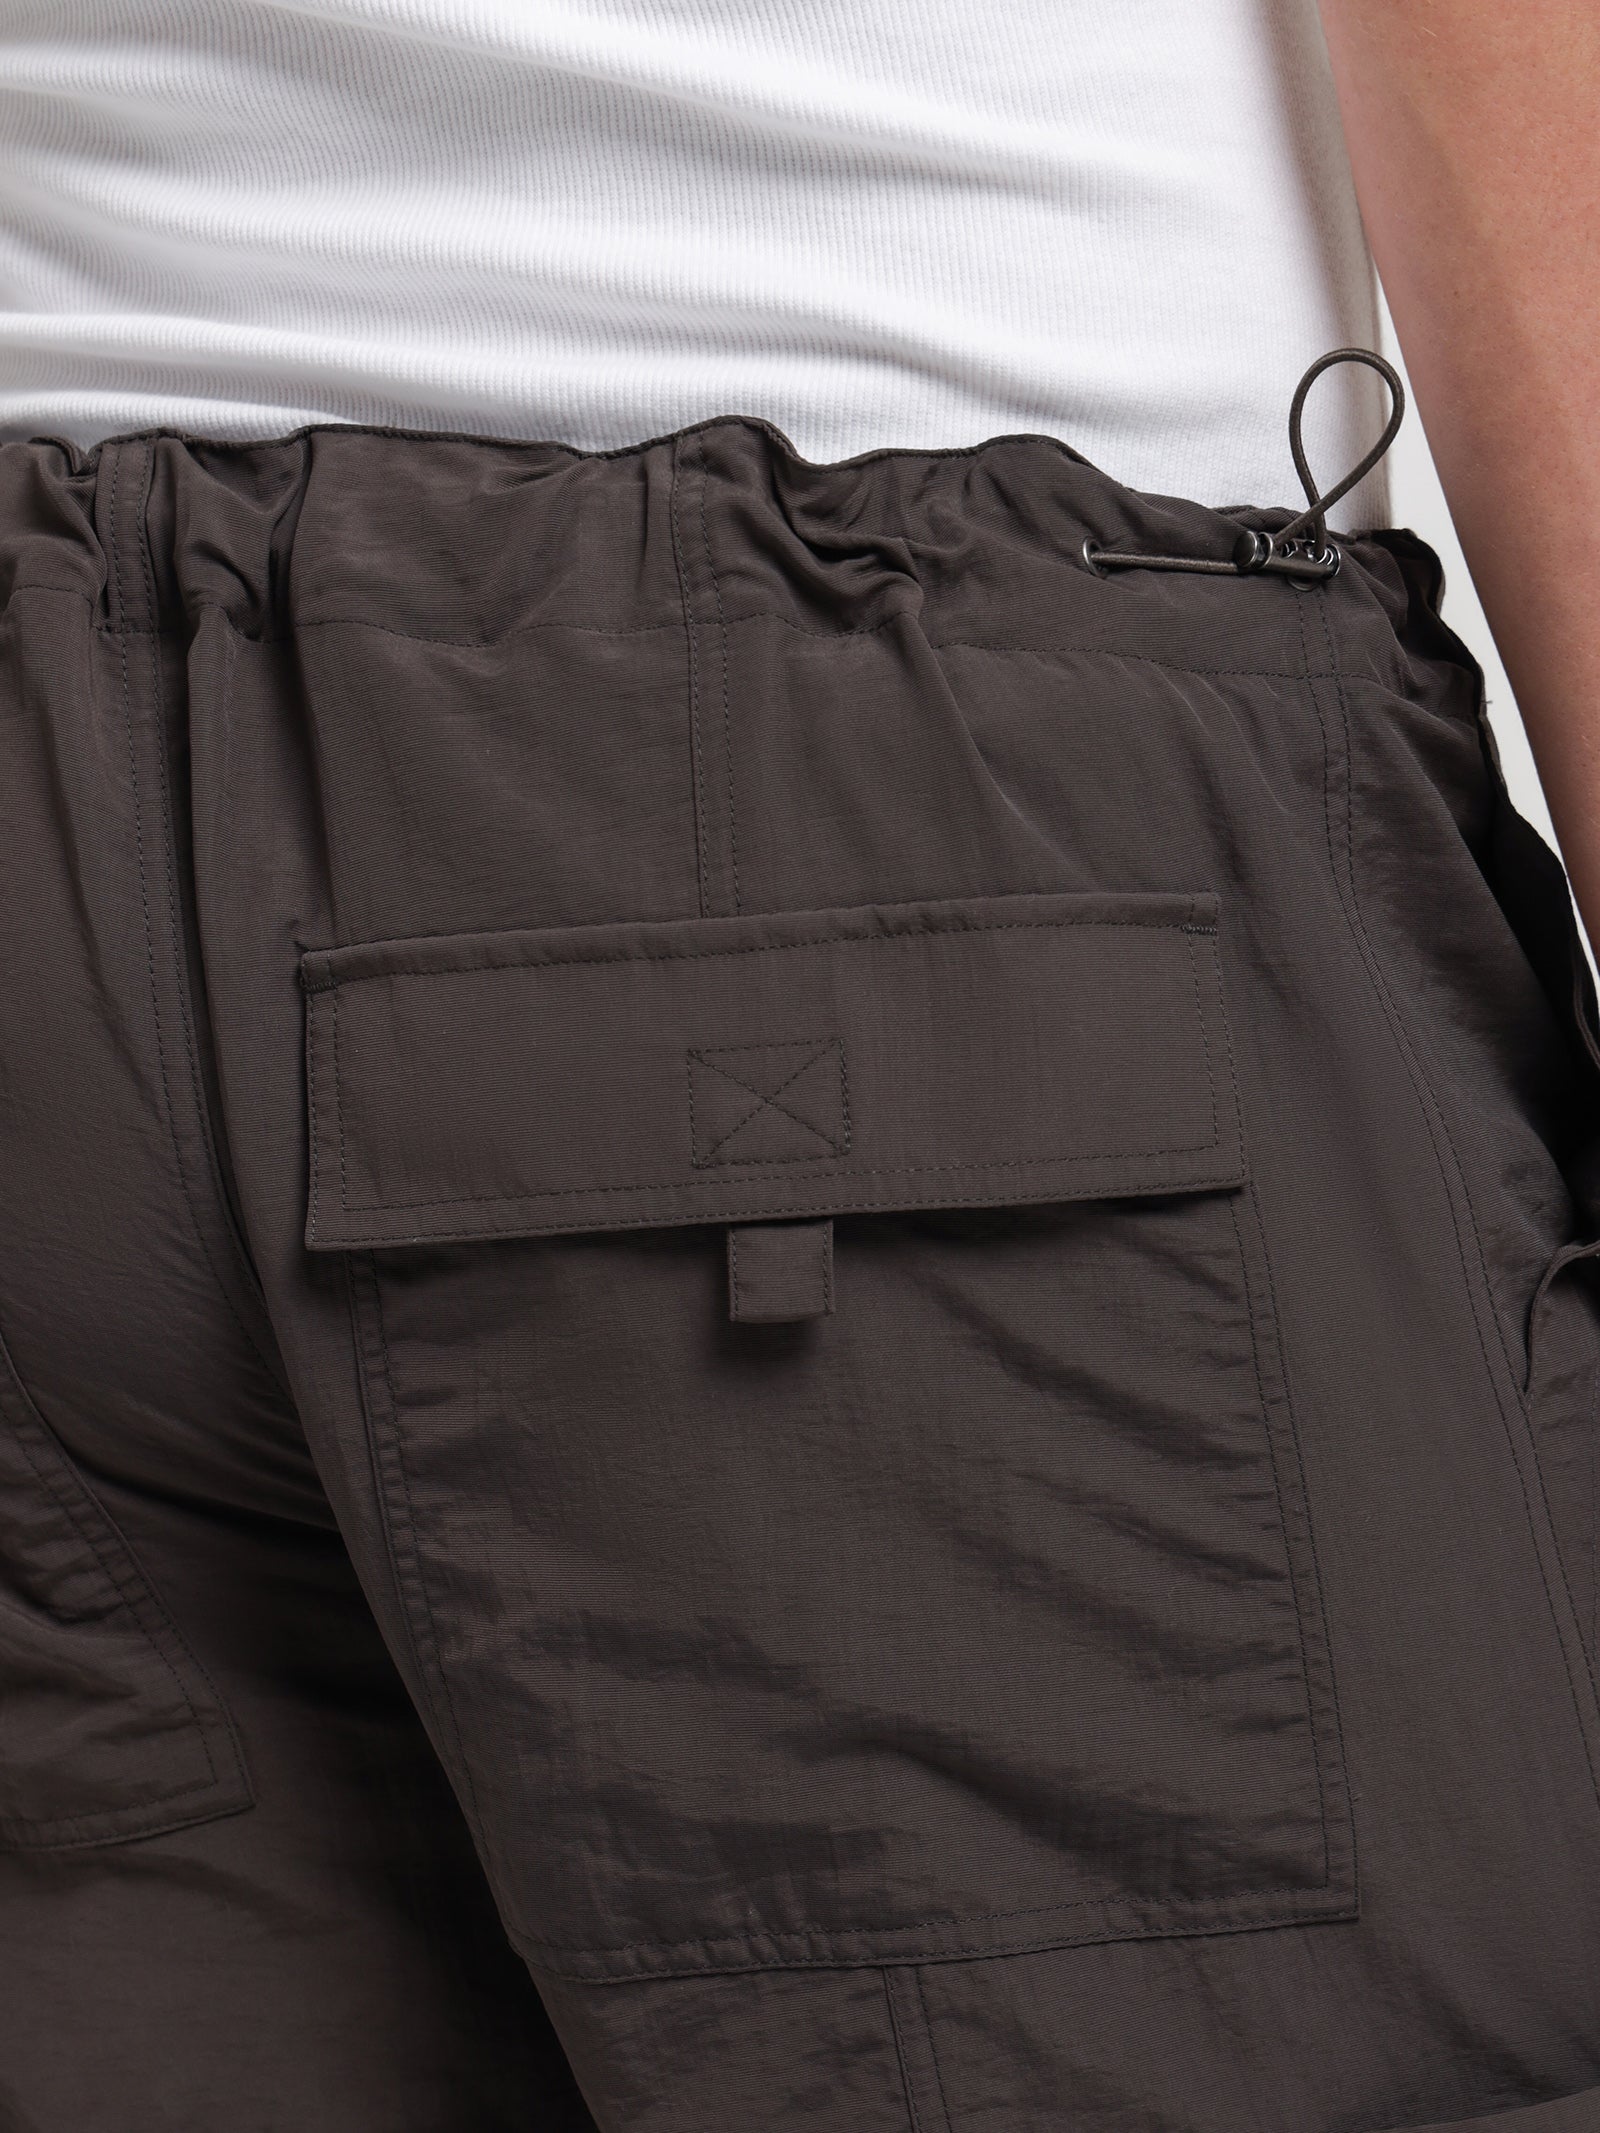 Conspiracy Parachute Pants in Obsidian Black